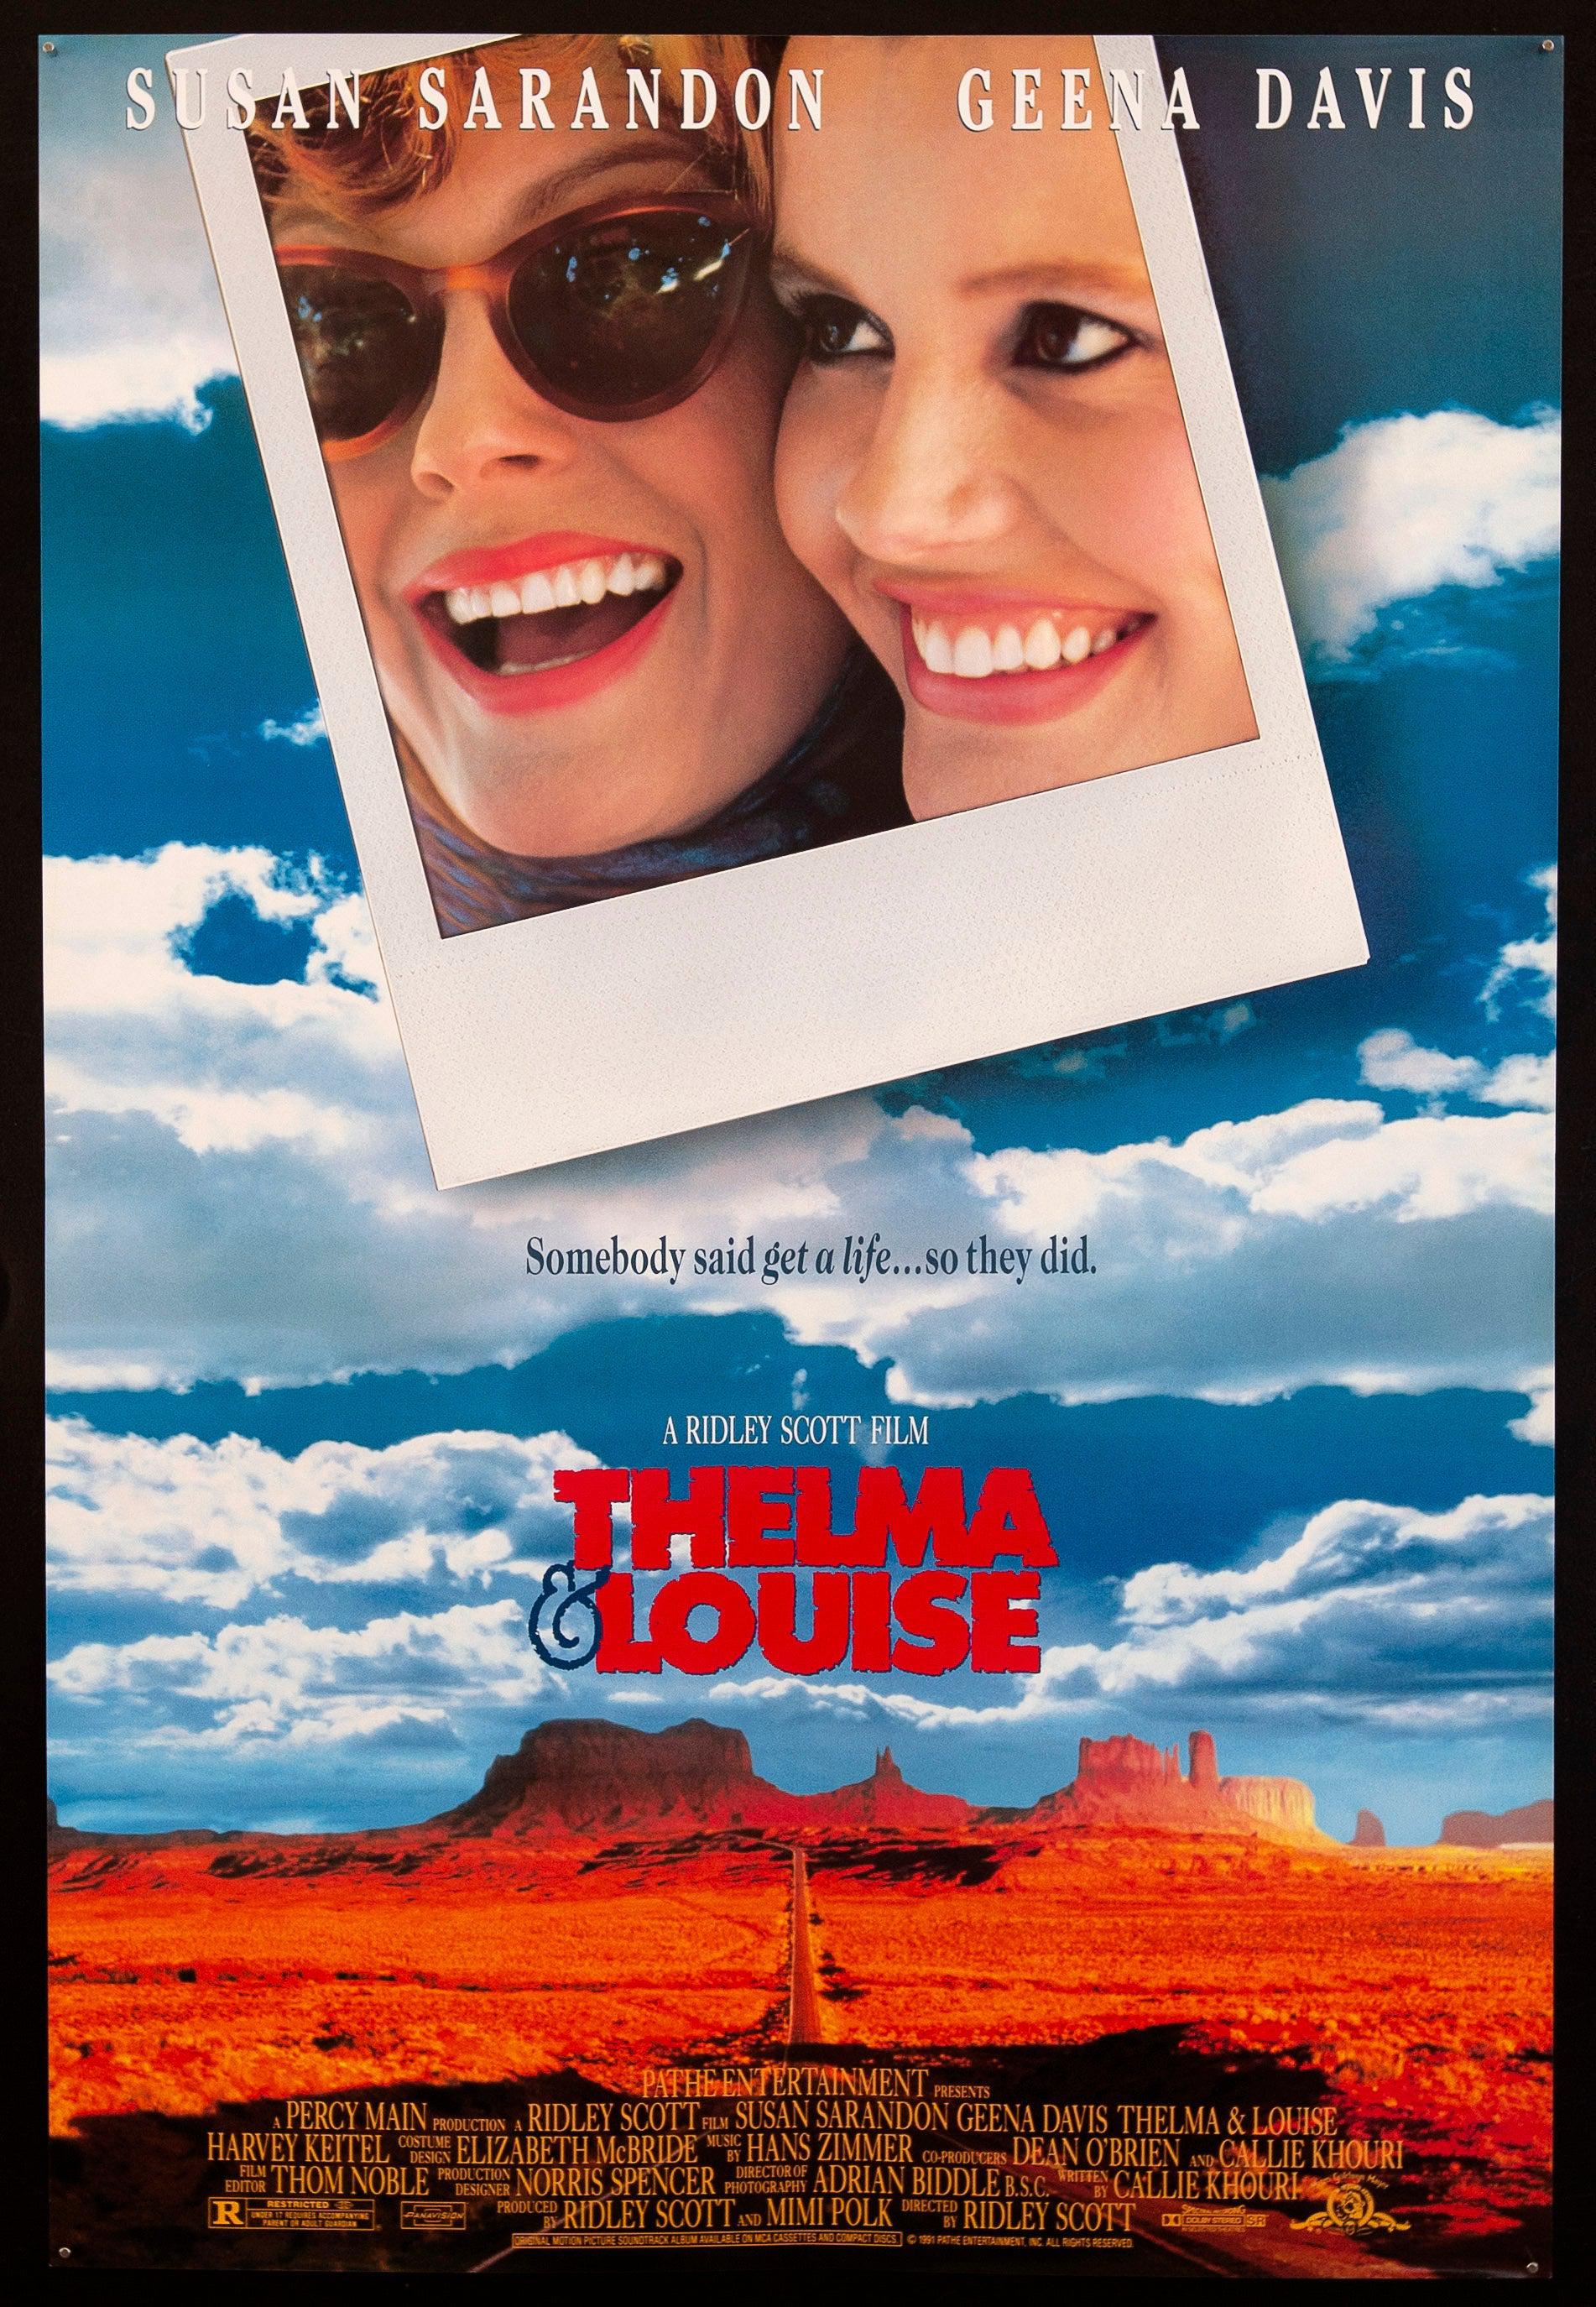 Thelma & Louise  Thelma and louise movie, Thelma louise, Movie posters